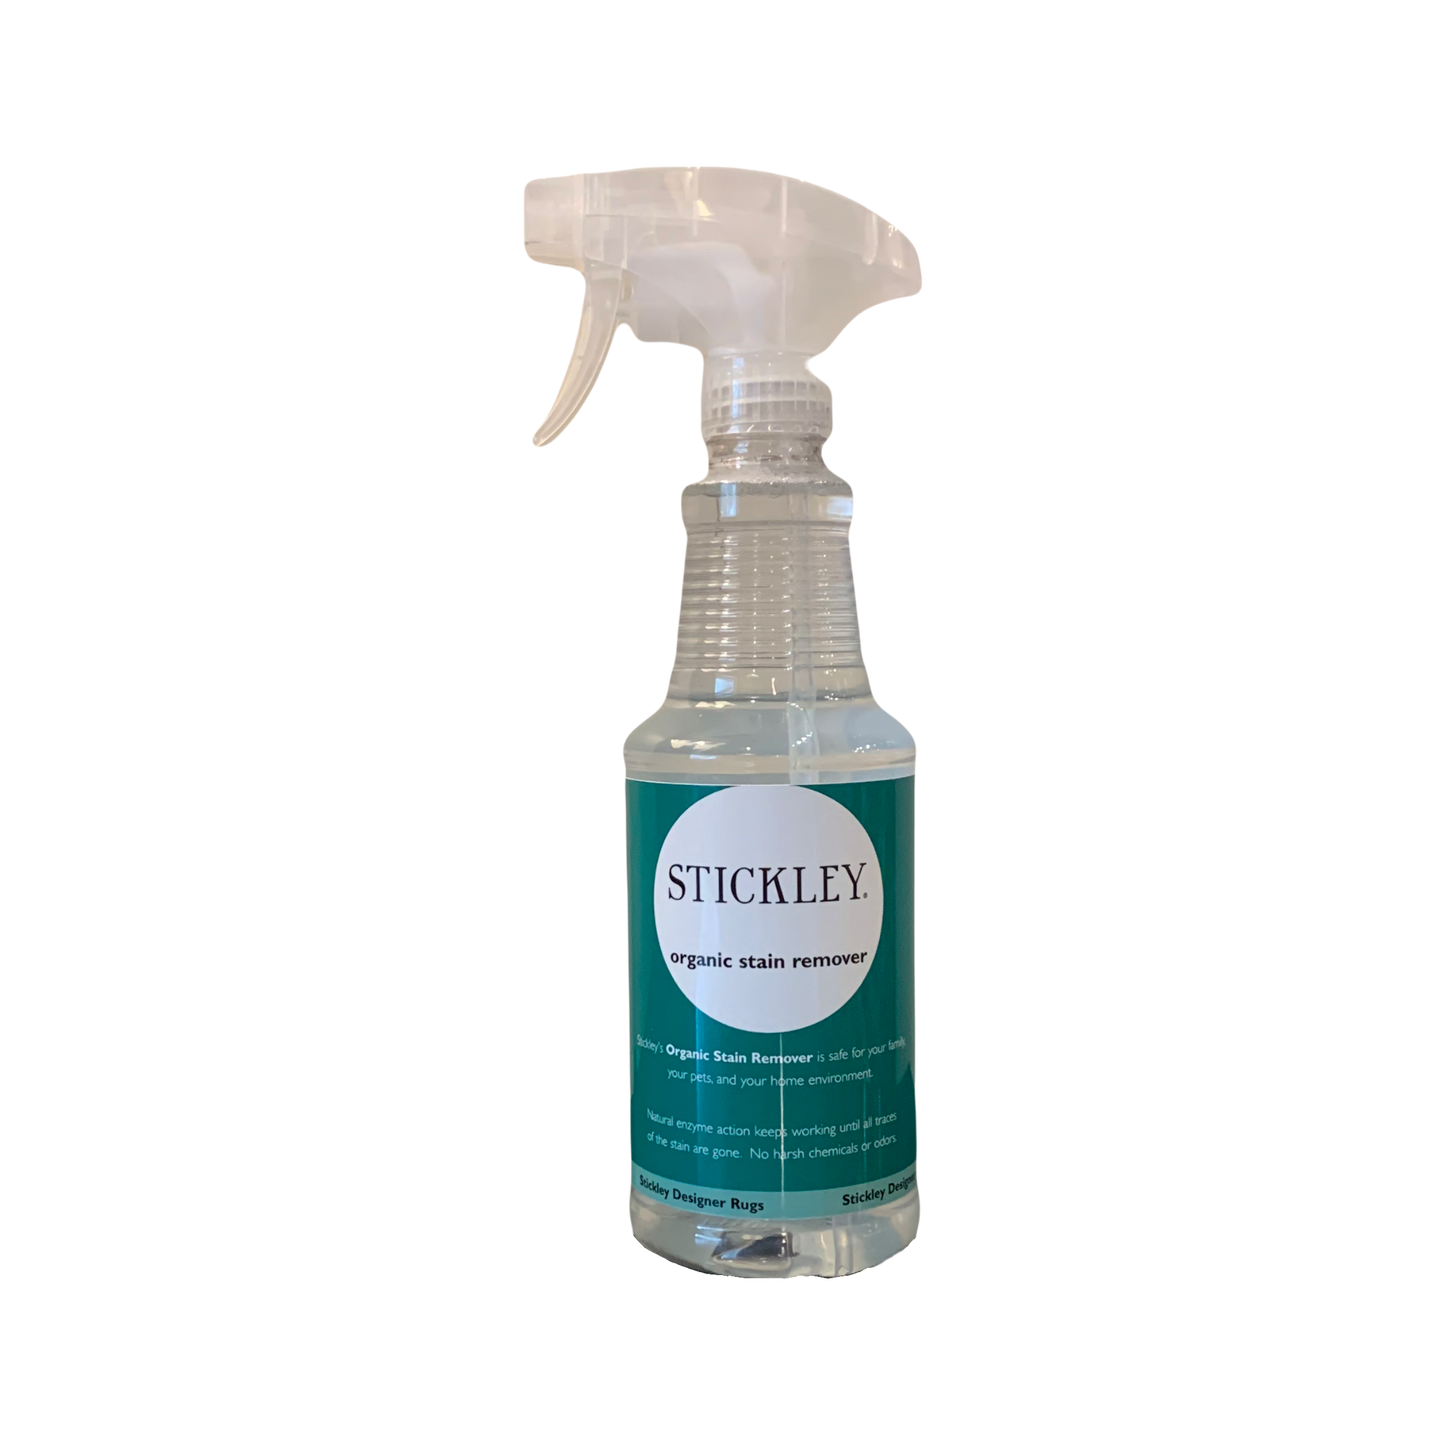 Stickley Organic Stain Remover